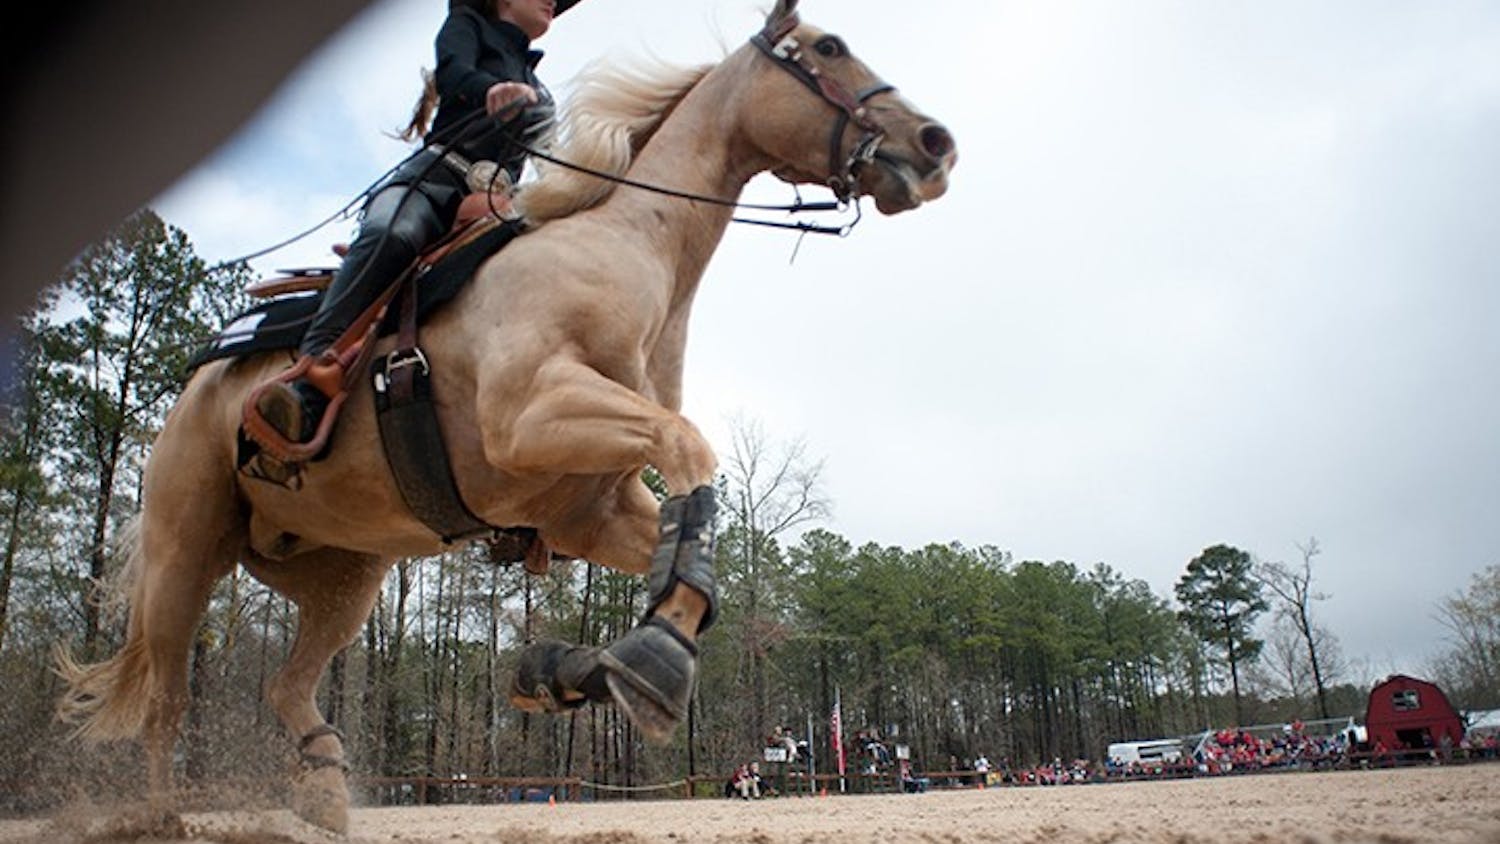 The South Carolina Equestrian team competes in the SEC championships against Georgia at One Wood Farm in Blythewood, S.C., Saturday, March 29, 2014. (C Michael Bergen/The State/MCT)